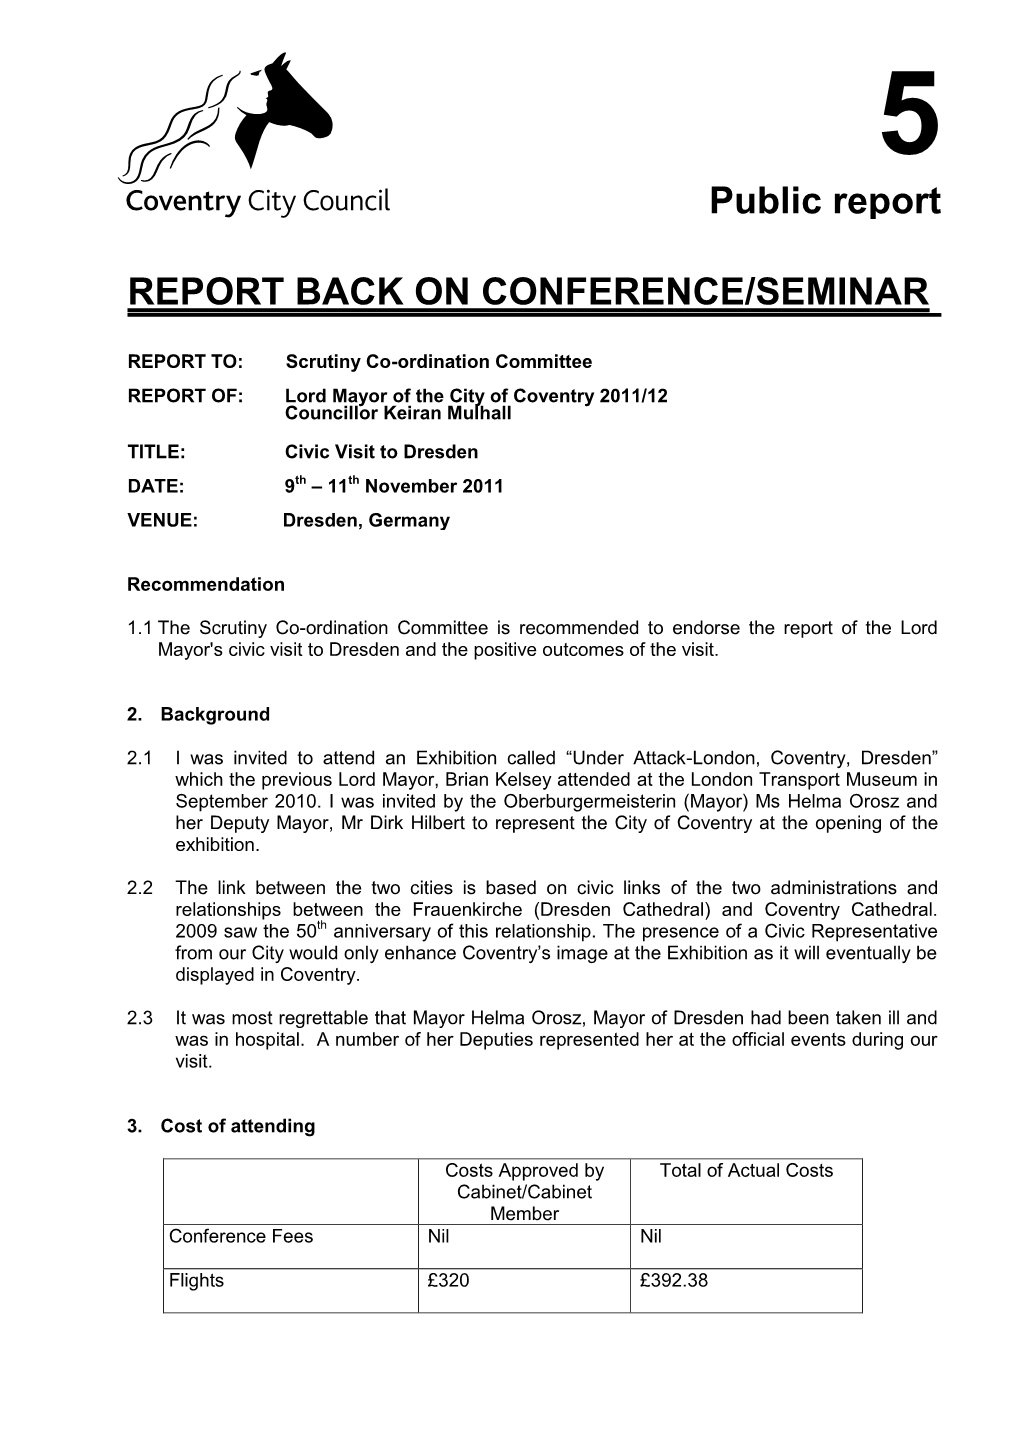 Report Back on Conference Seminar